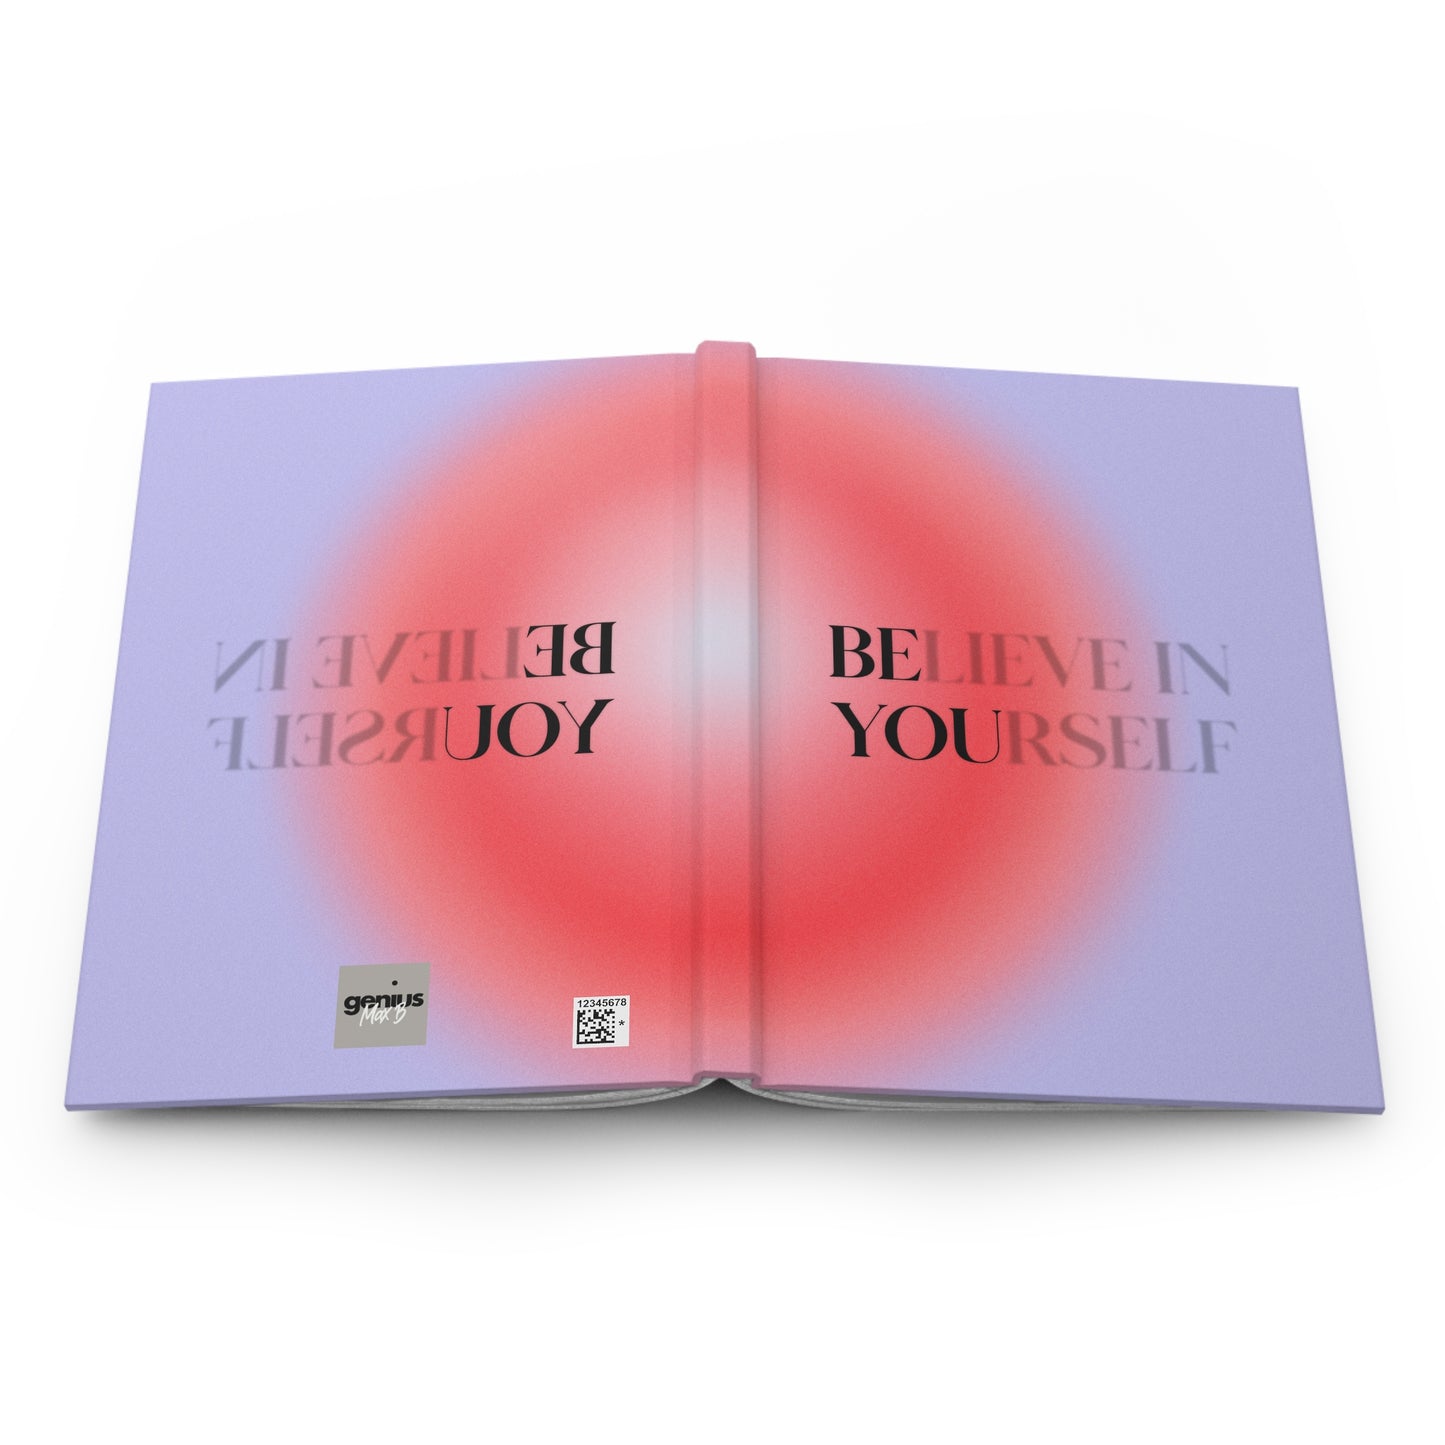 Be You - Journal